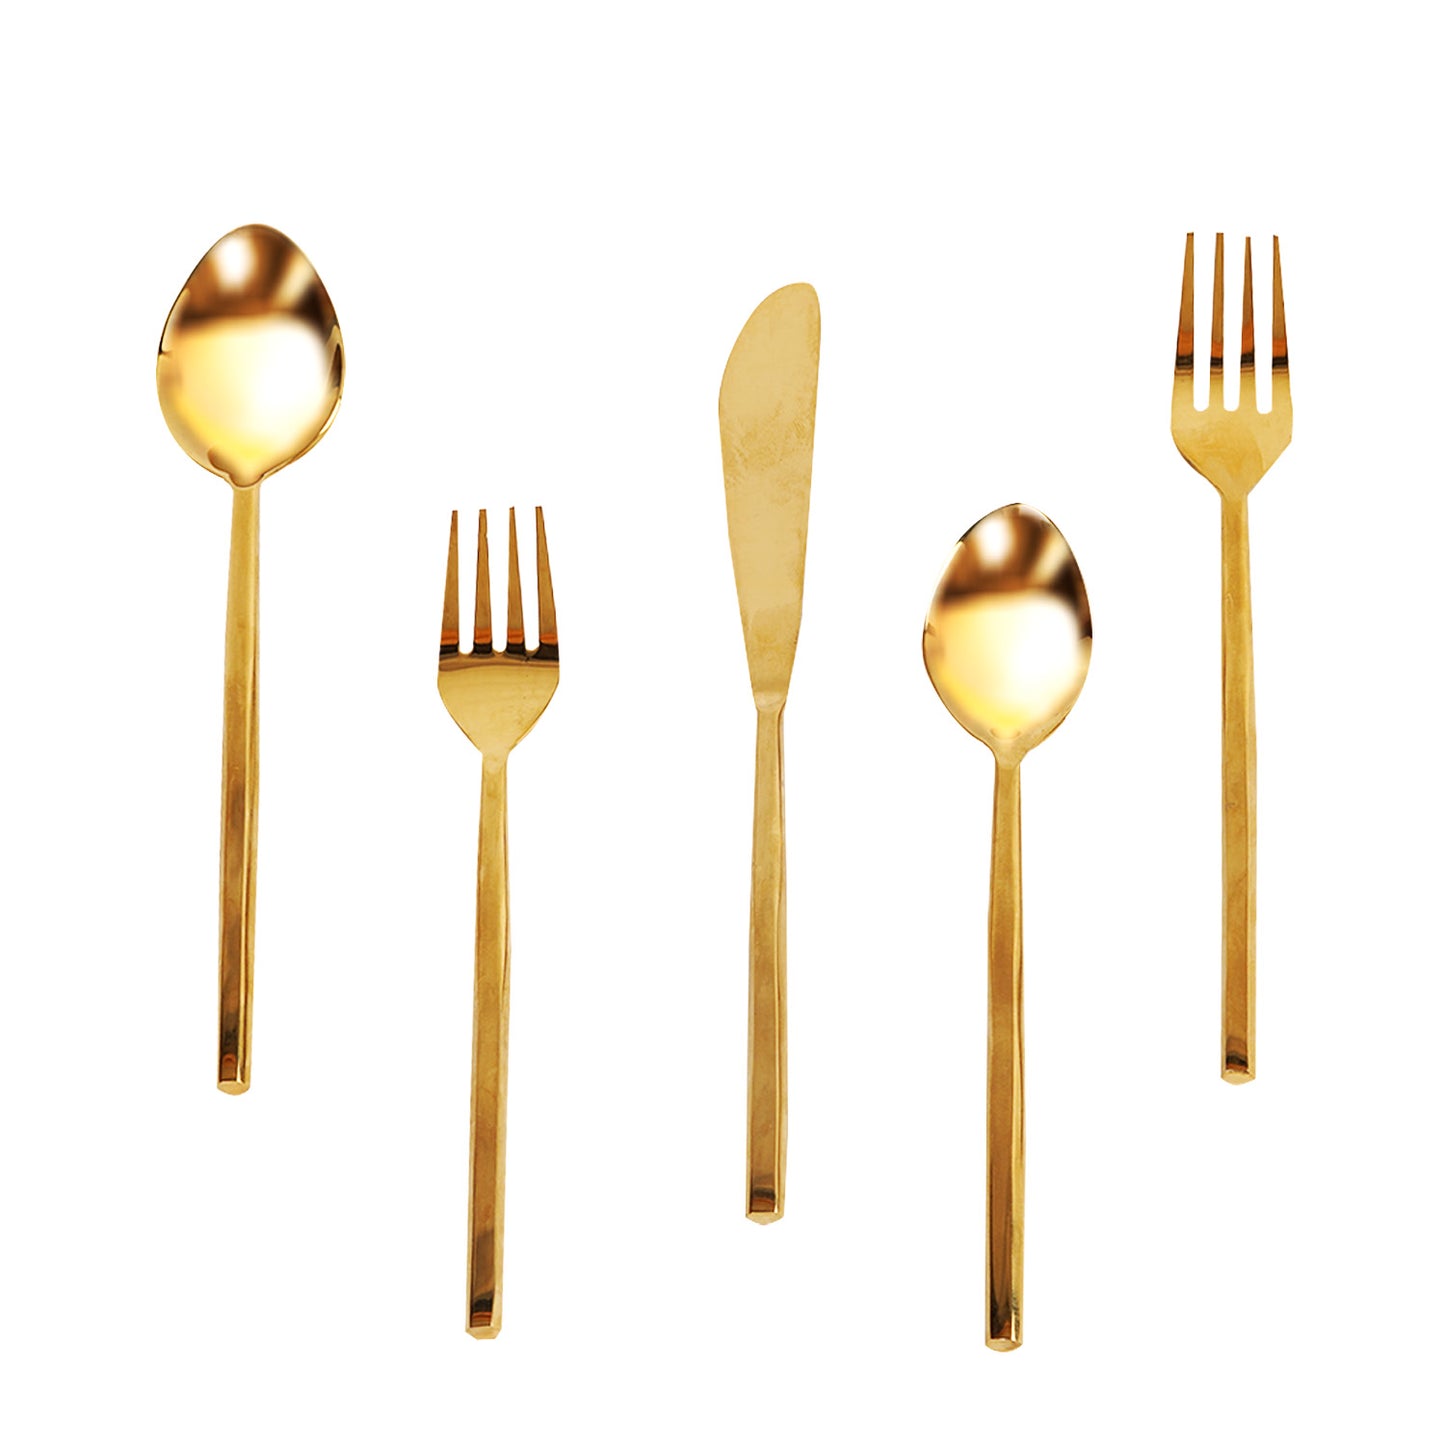 Fusion Harmony: Set of 5 Cutlery with Stylish Handles